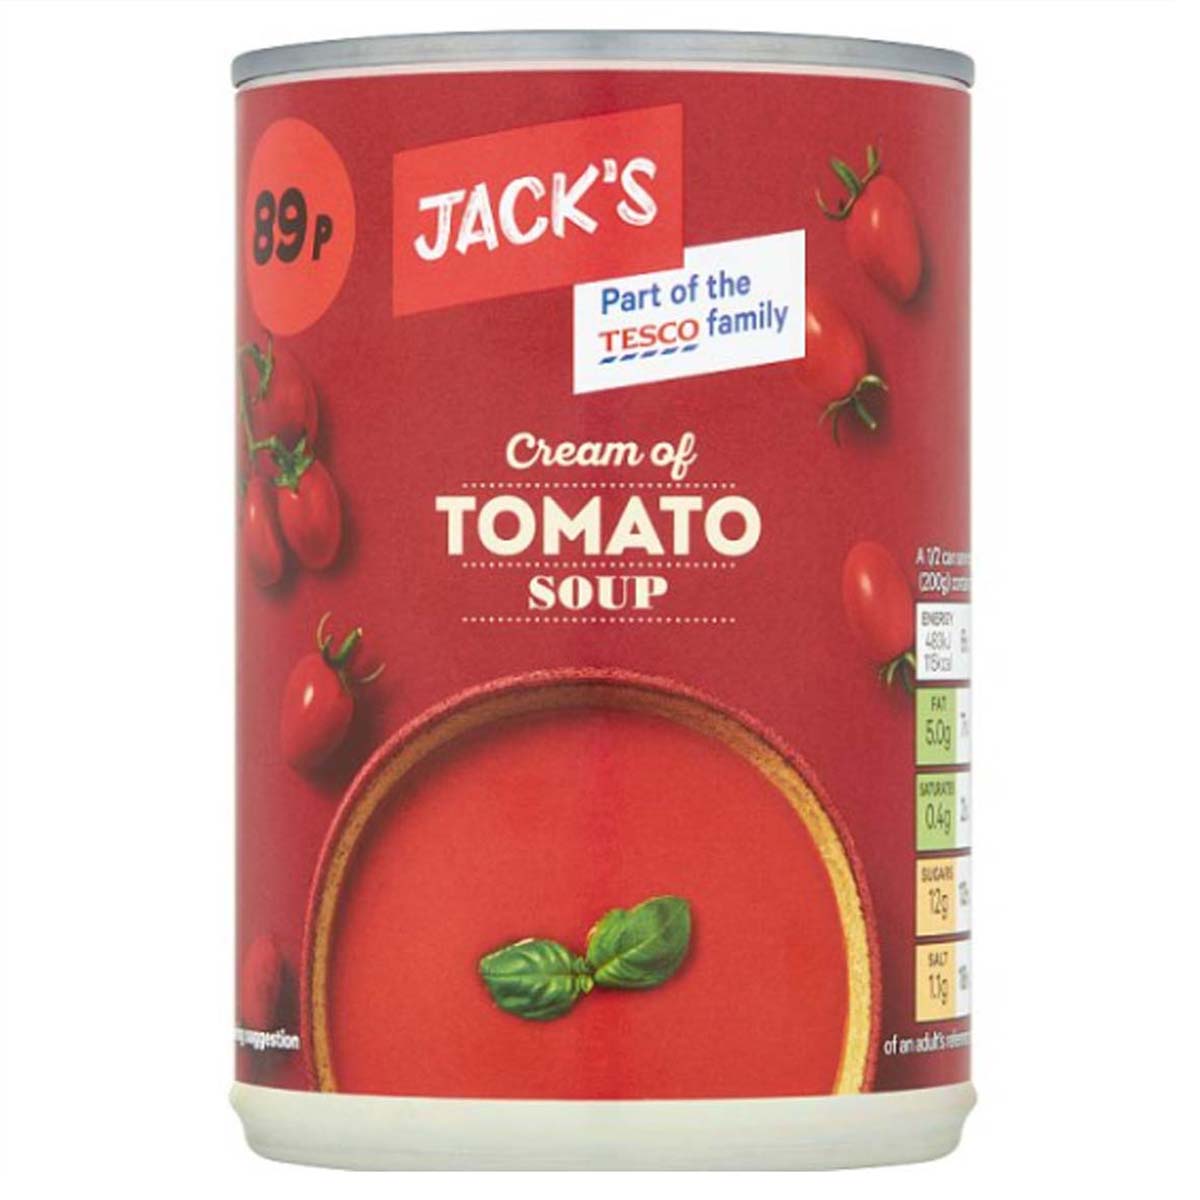 Jack's - Cream of Tomato Soup - 400g - Continental Food Store